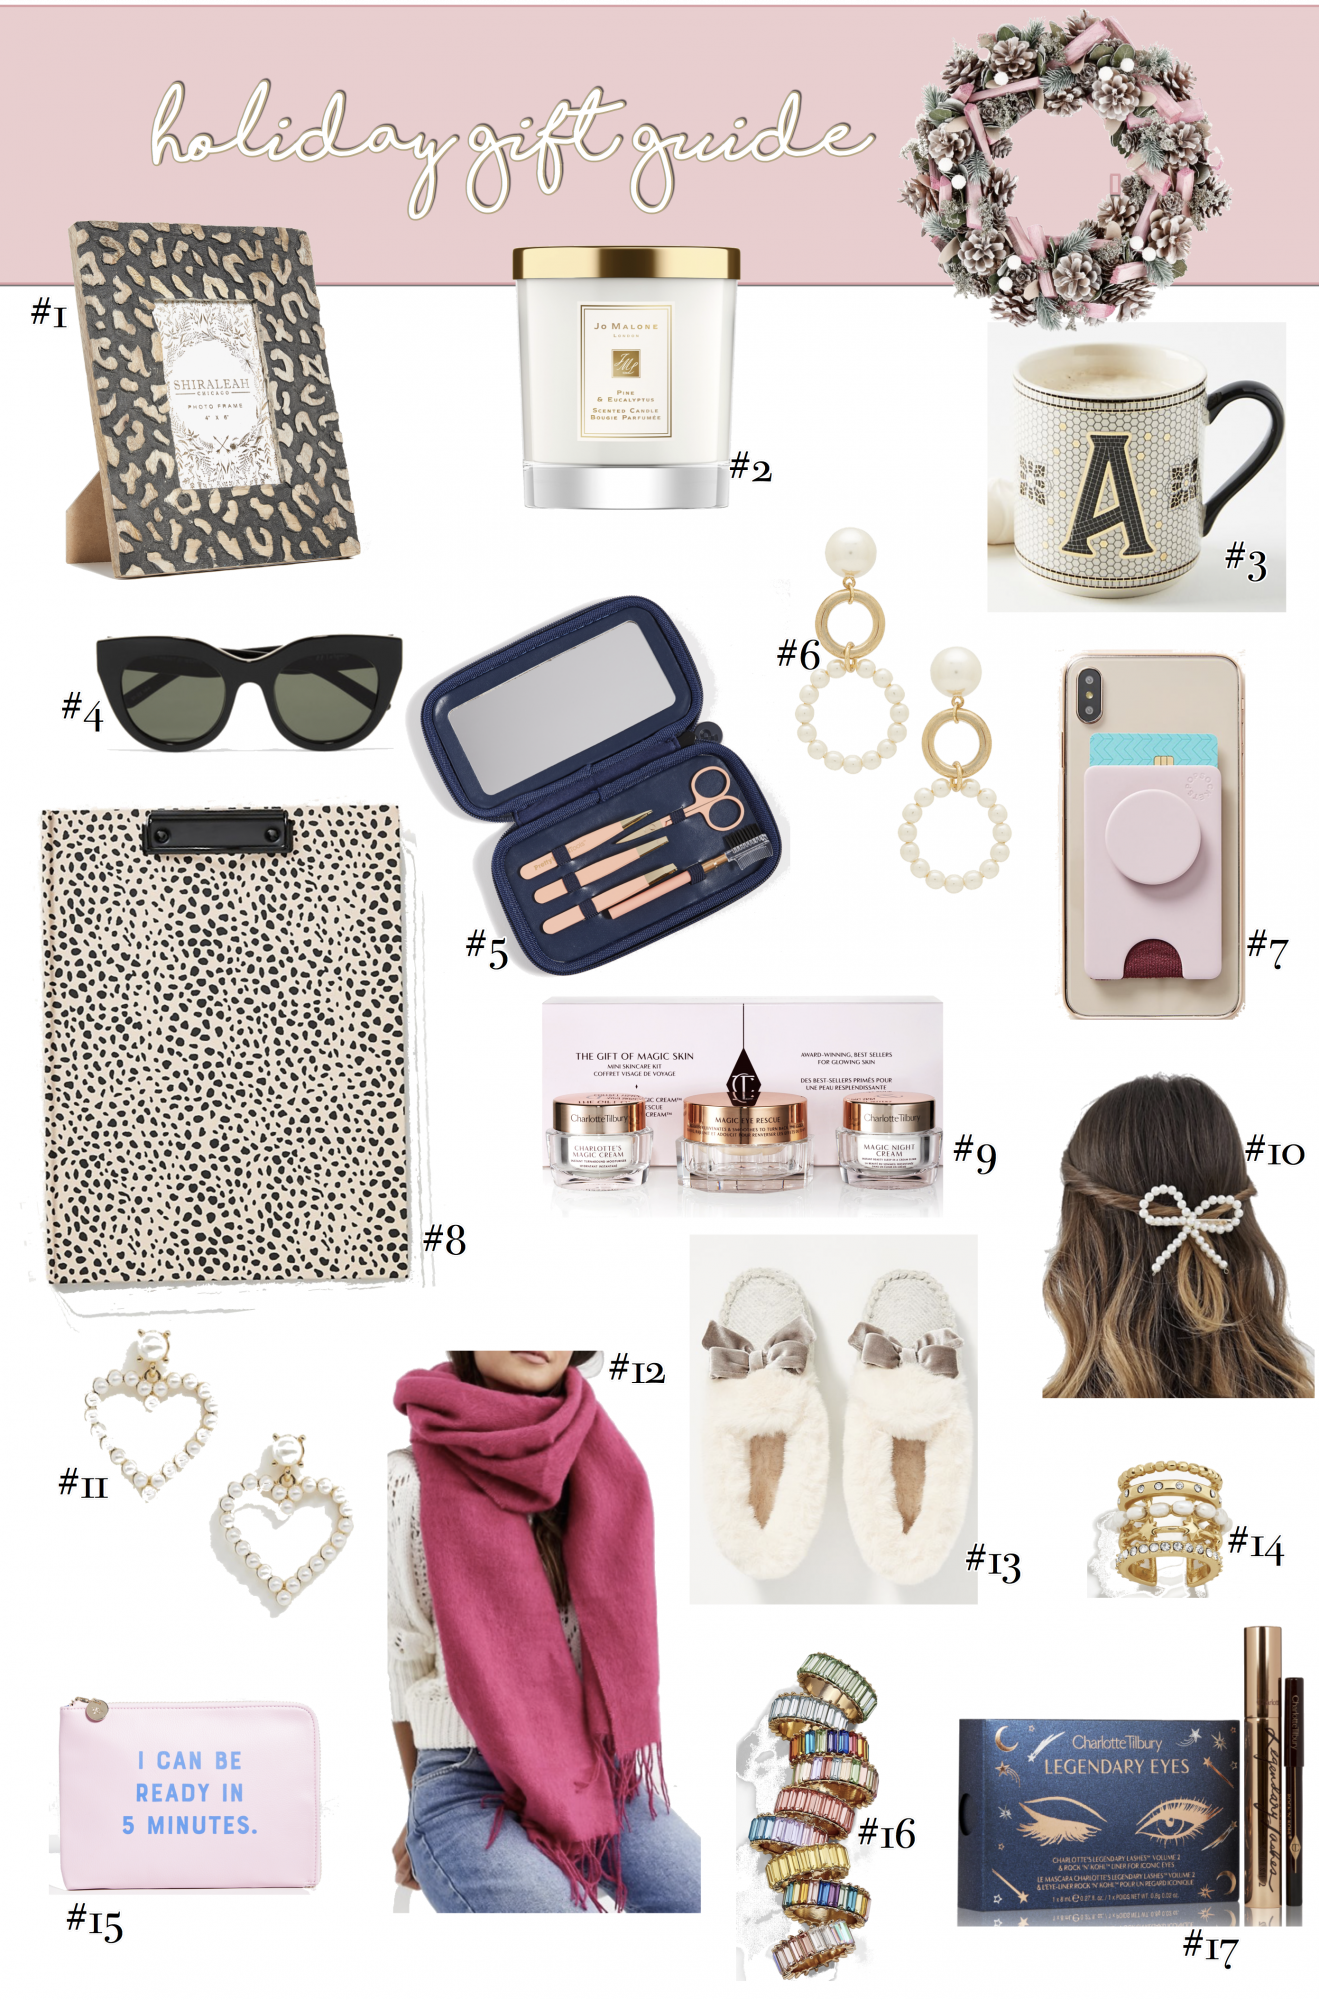 https://www.thesweetestthingblog.com/wp-content/uploads/2019/11/Christmas-gift-guide-2019.png